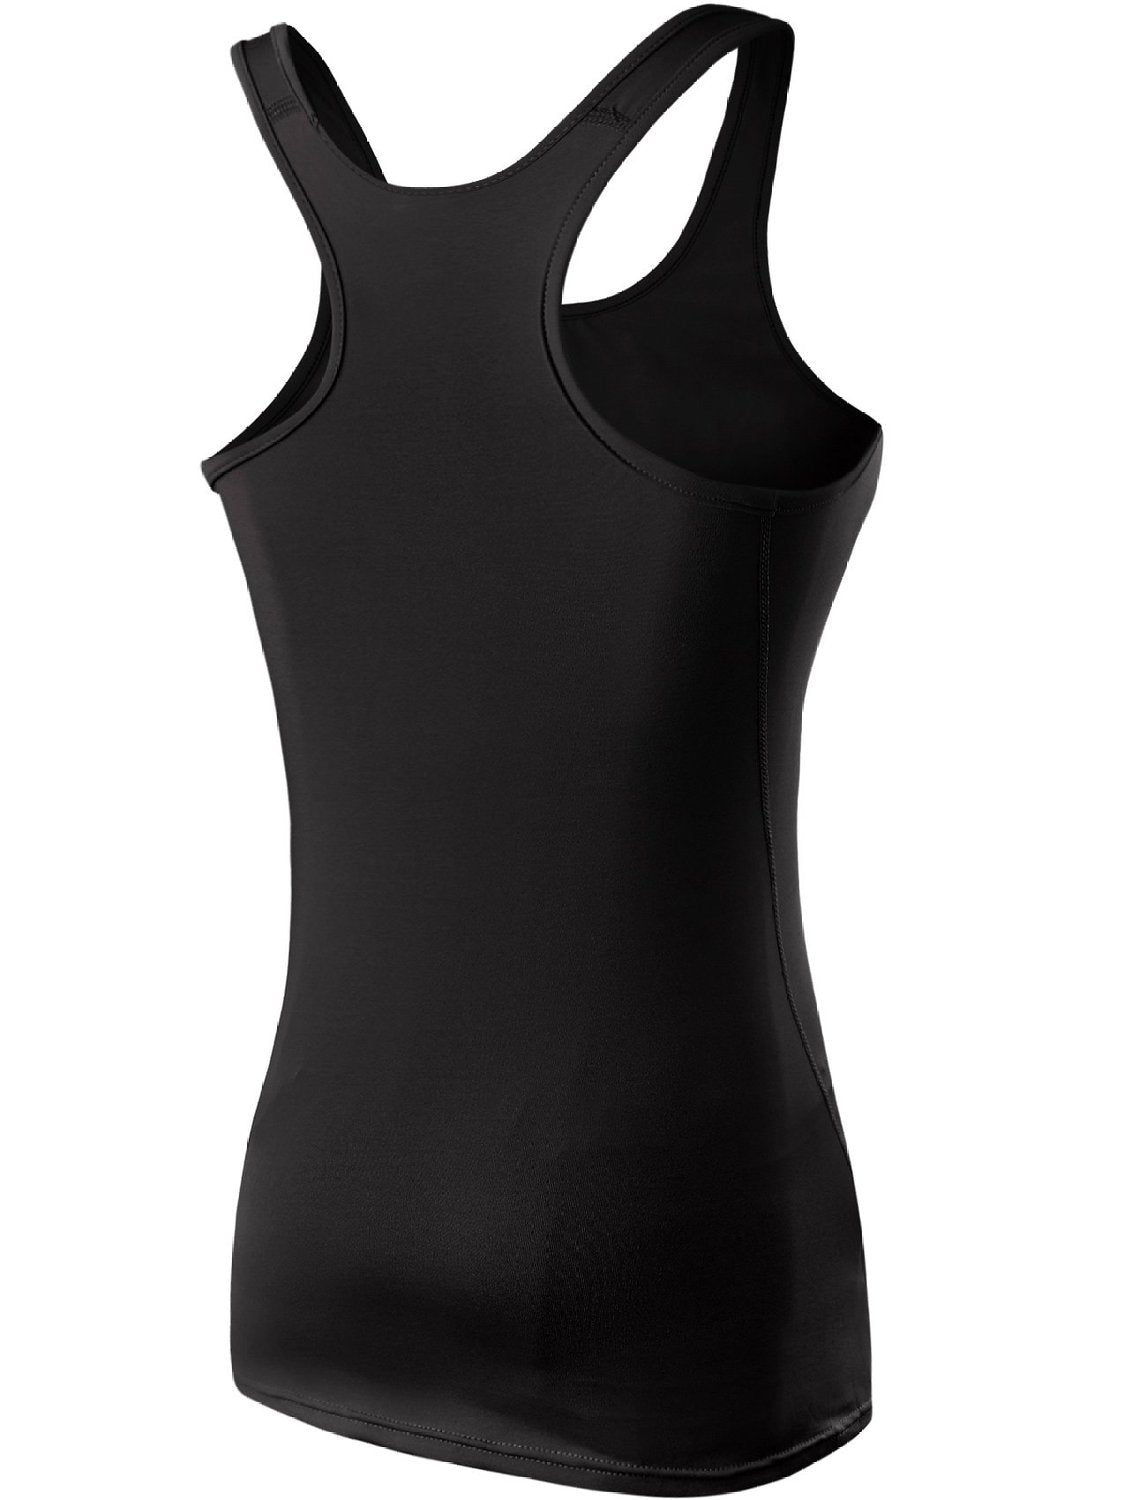  Neleus Womens 3 Pack Compression Athletic Dry Fit Long Tank  Top